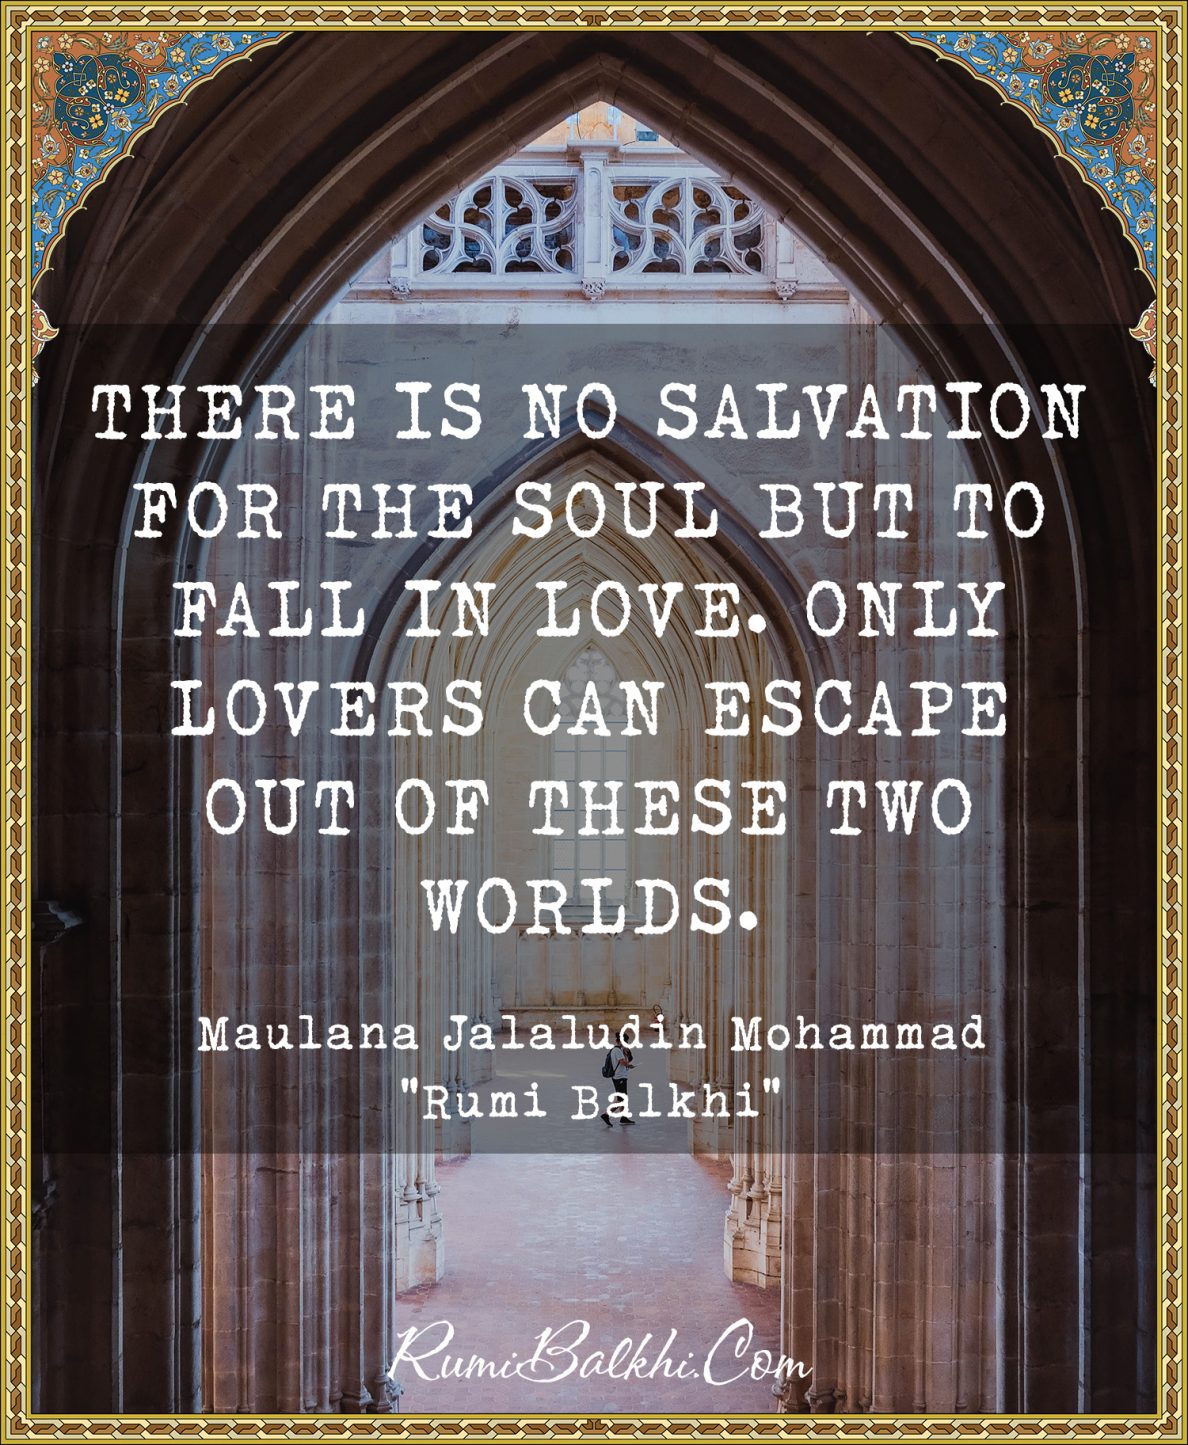 There is no salvation for the soul but to fall in love. Only lovers can escape out of these two worlds